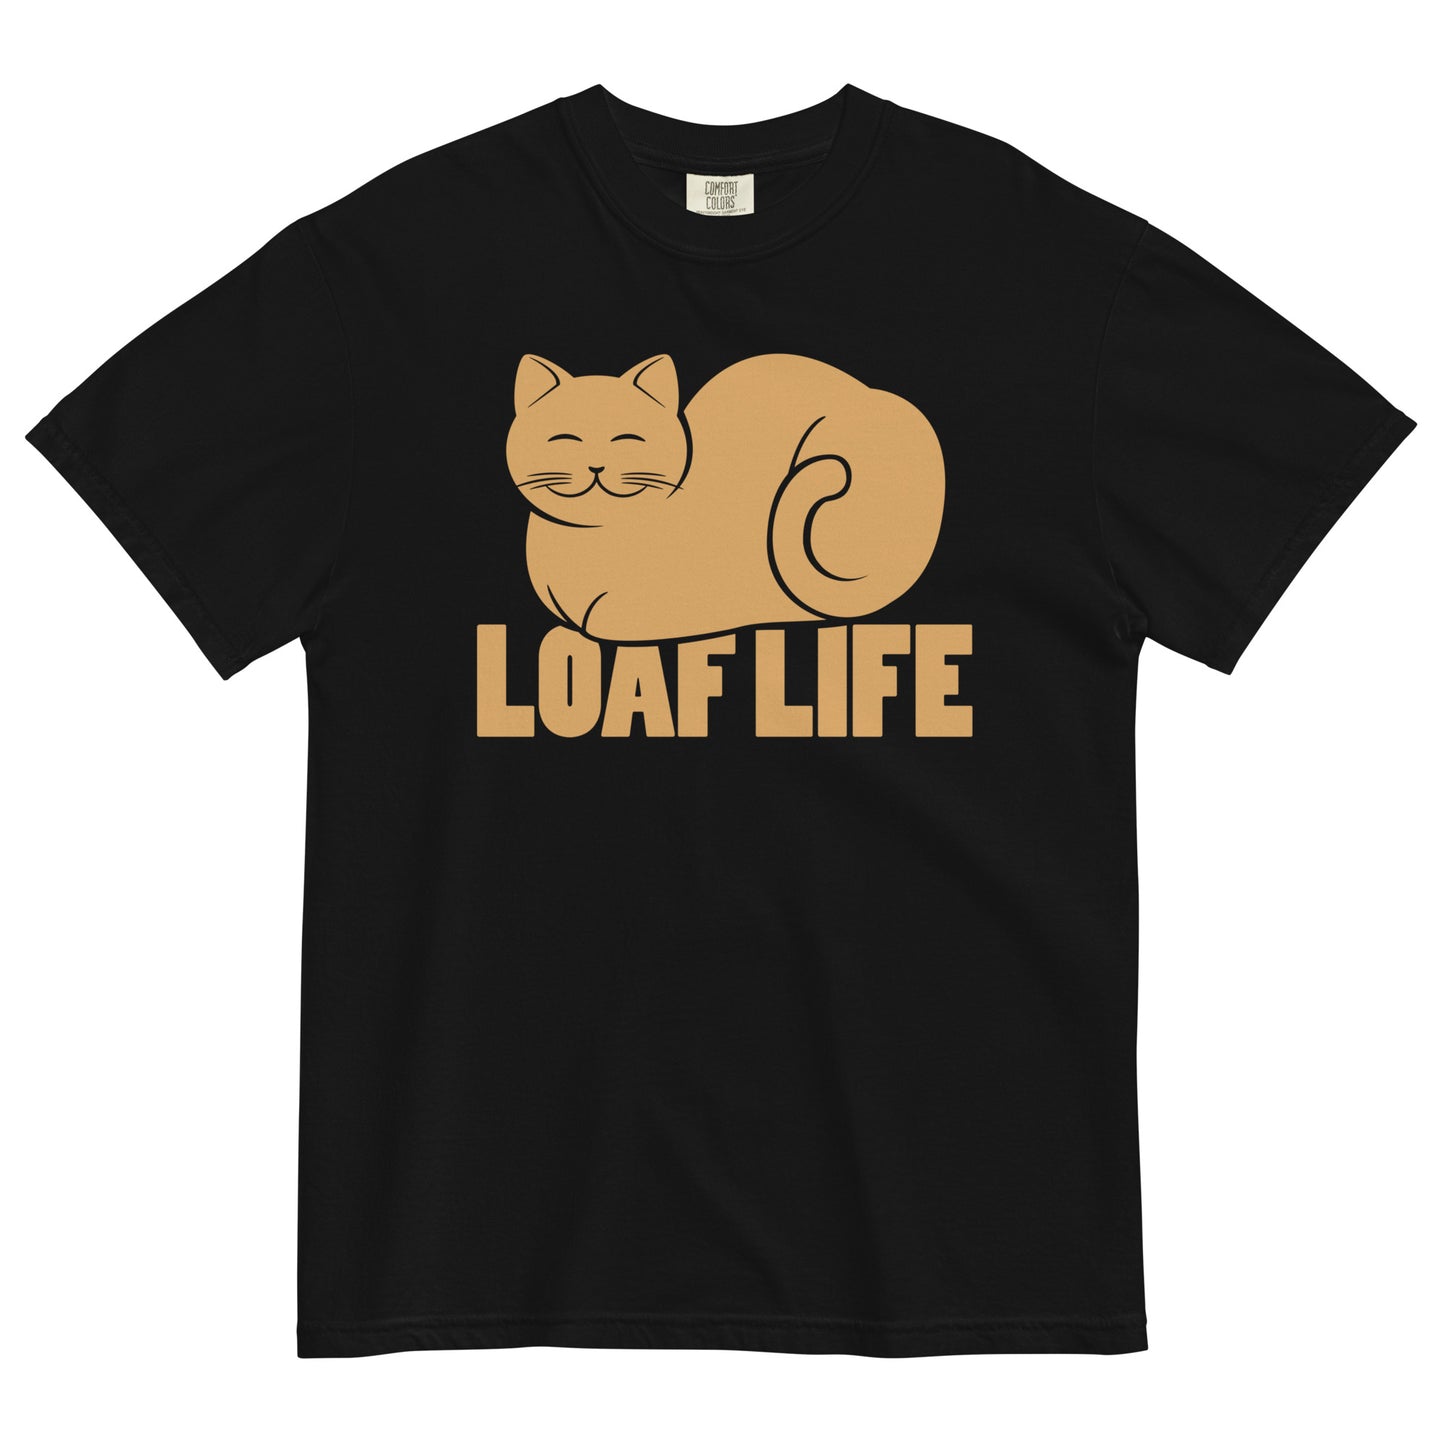 Loaf Life Men's Relaxed Fit Tee